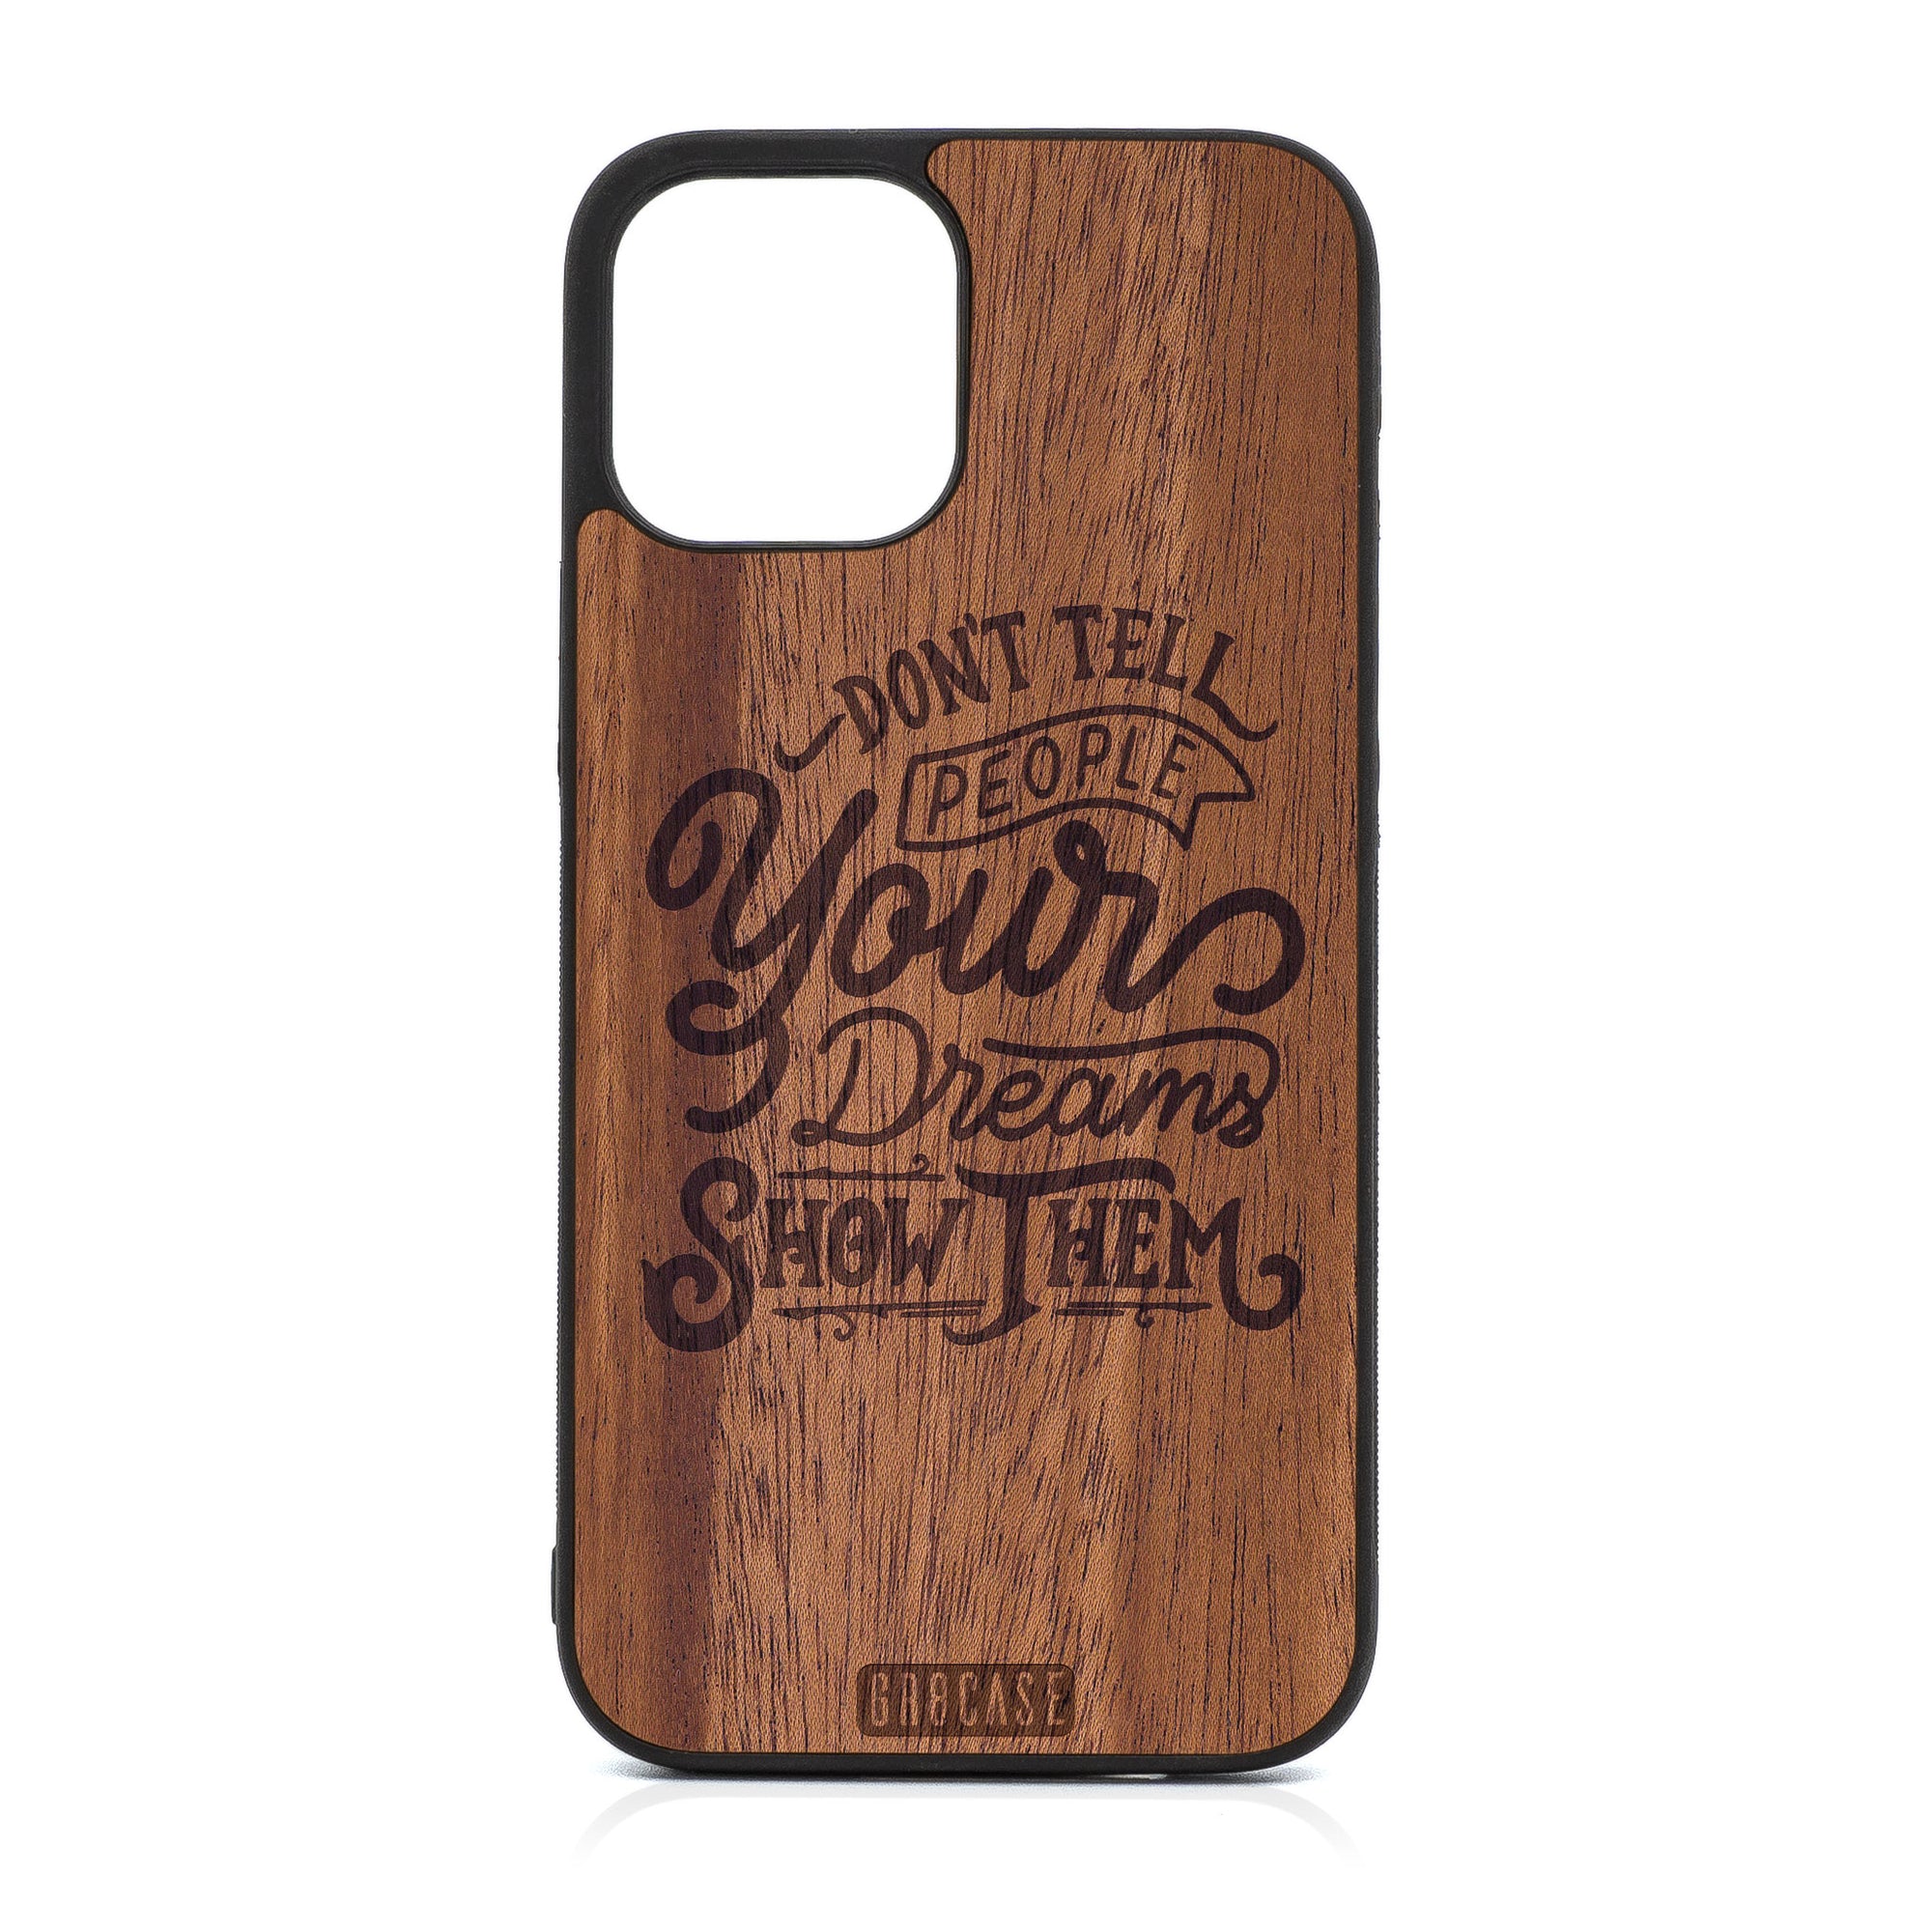 Don't Tell People Your Dreams Show Them Design Wood Case For iPhone 12 Pro Max